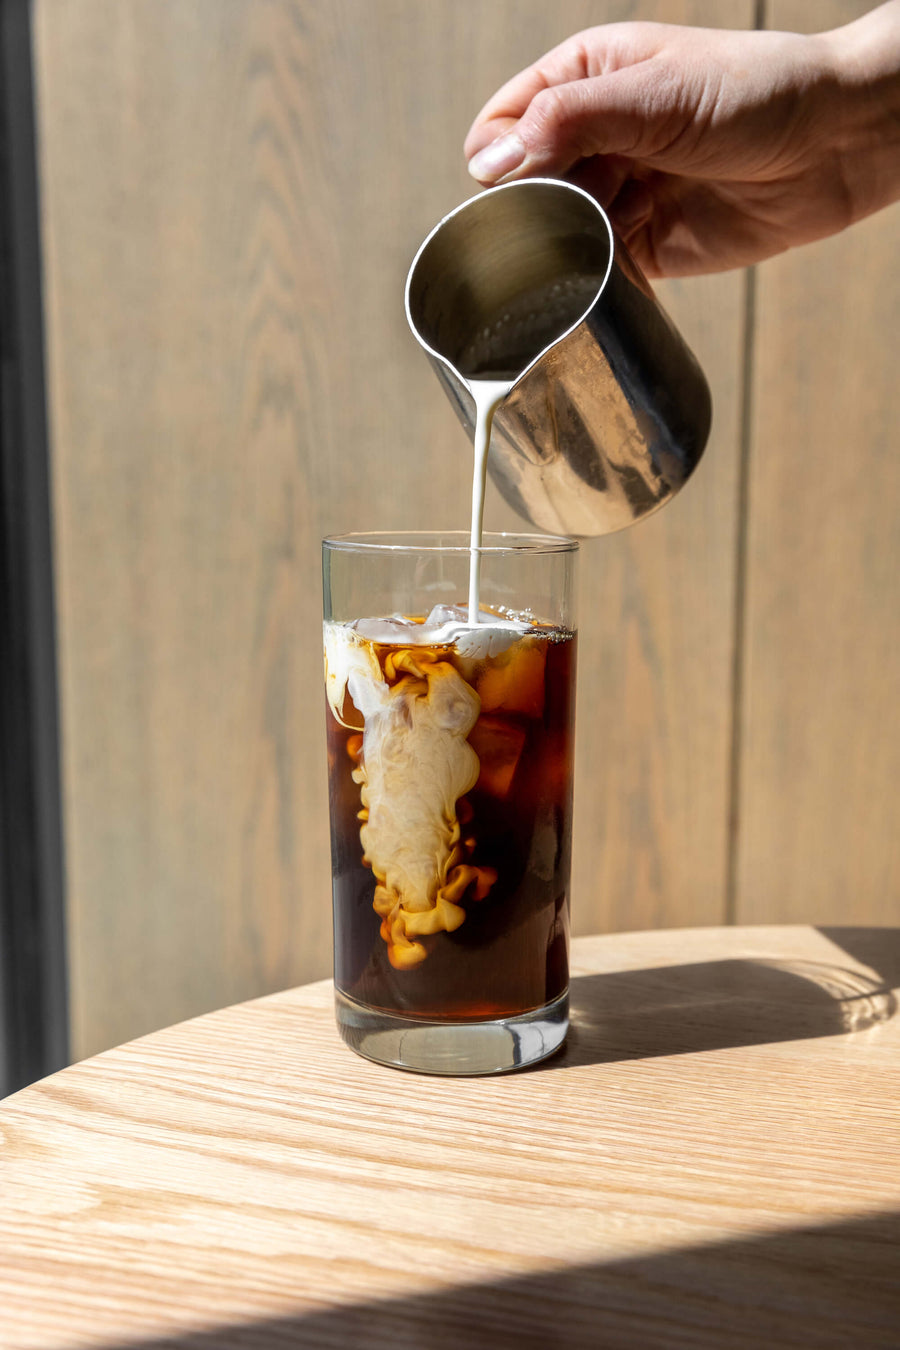 Hario Mizudashi Cold Brewer | Cold Brew Carafe | Brew Cafe Quality Cold Brew from Home | Pouring Cream into Cold Brew | Equator Coffees